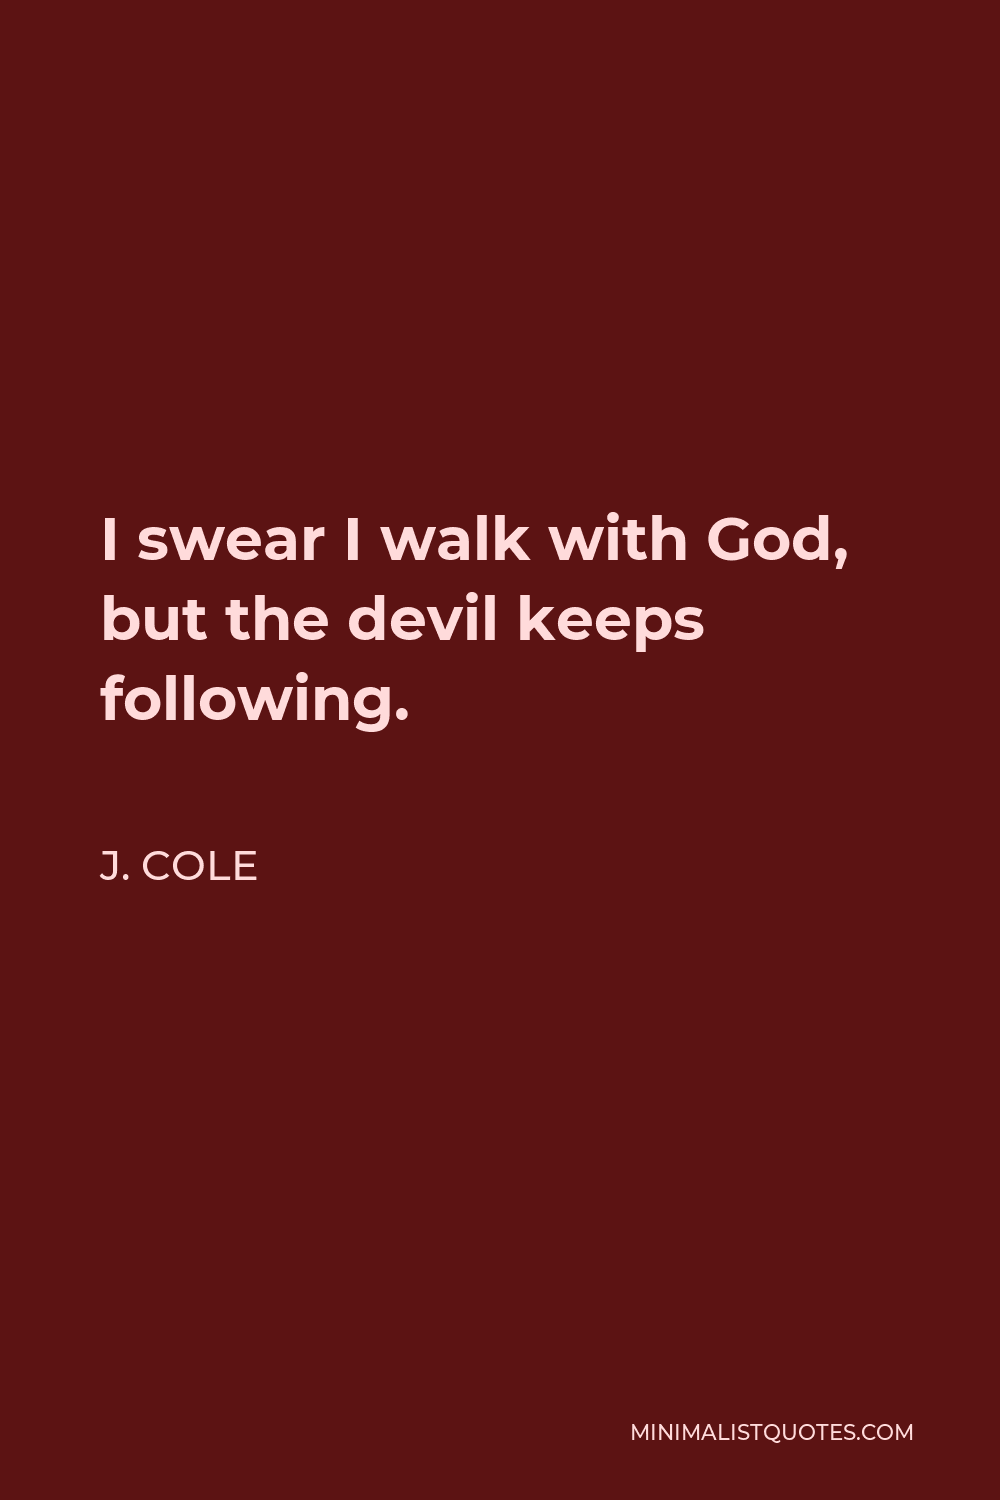 J. Cole Quote - I swear I walk with God, but the devil keeps following.